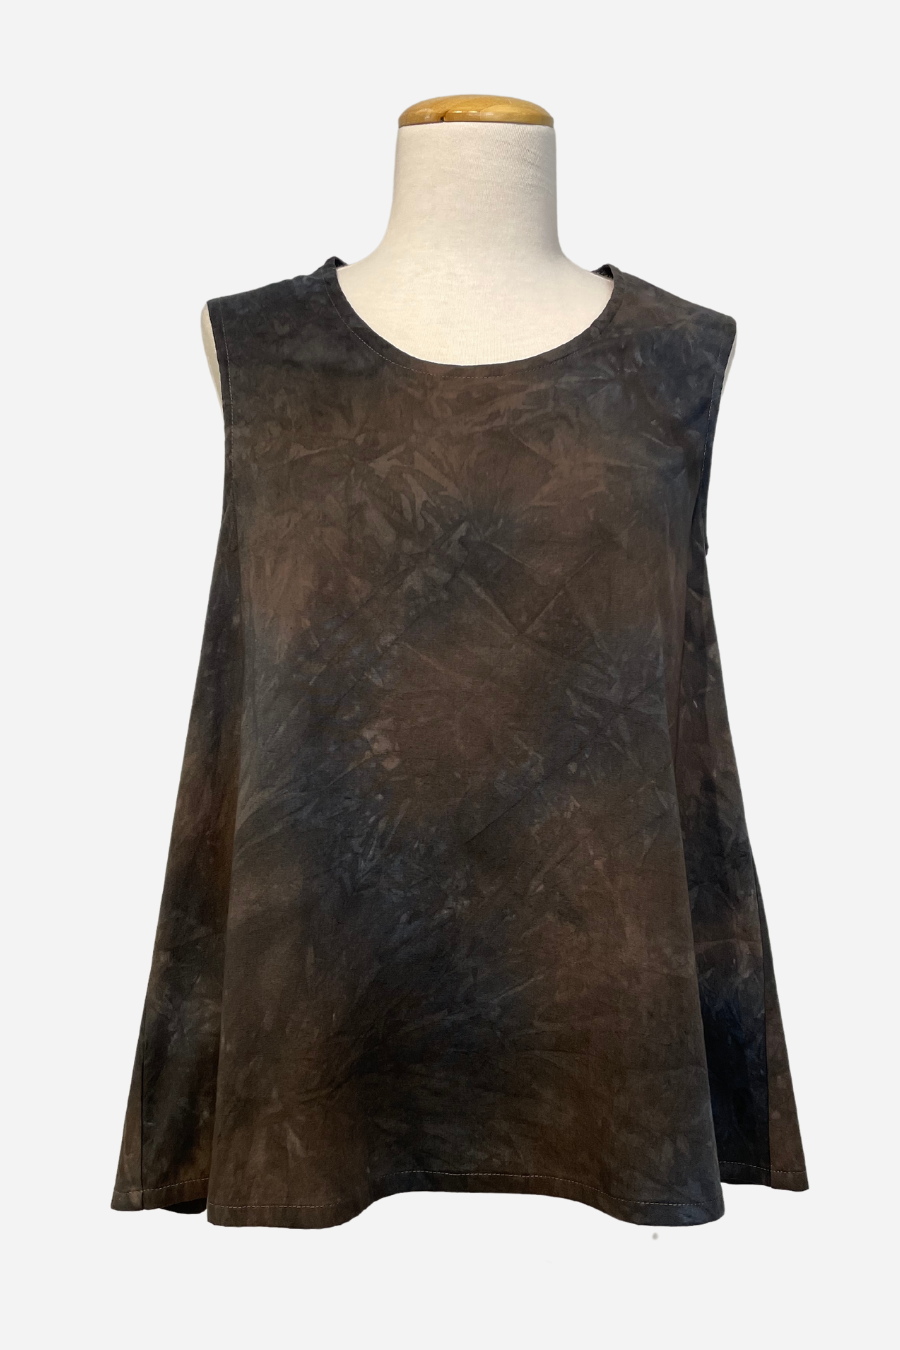 Huxley Tank in Notte Cotton Stretch ONLINE ONLY